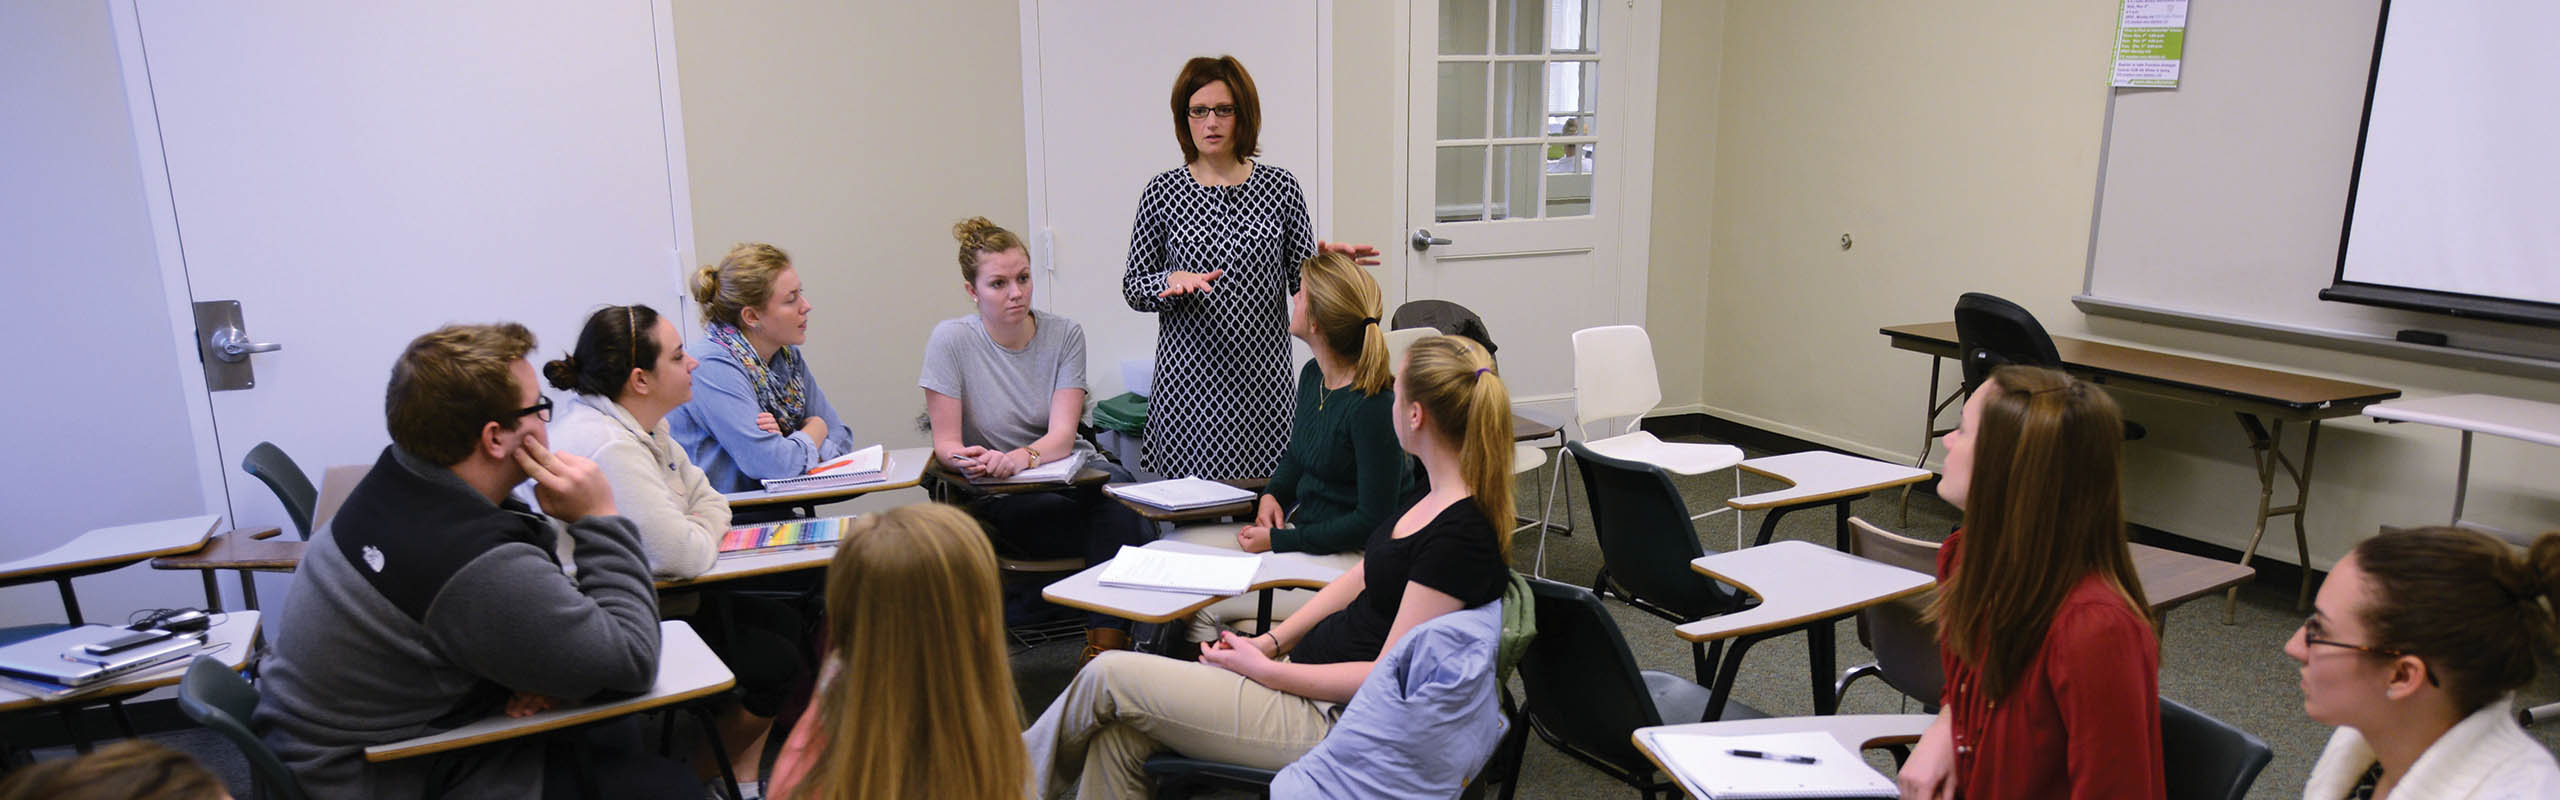 Marna Winter leads a class in the School of Education.